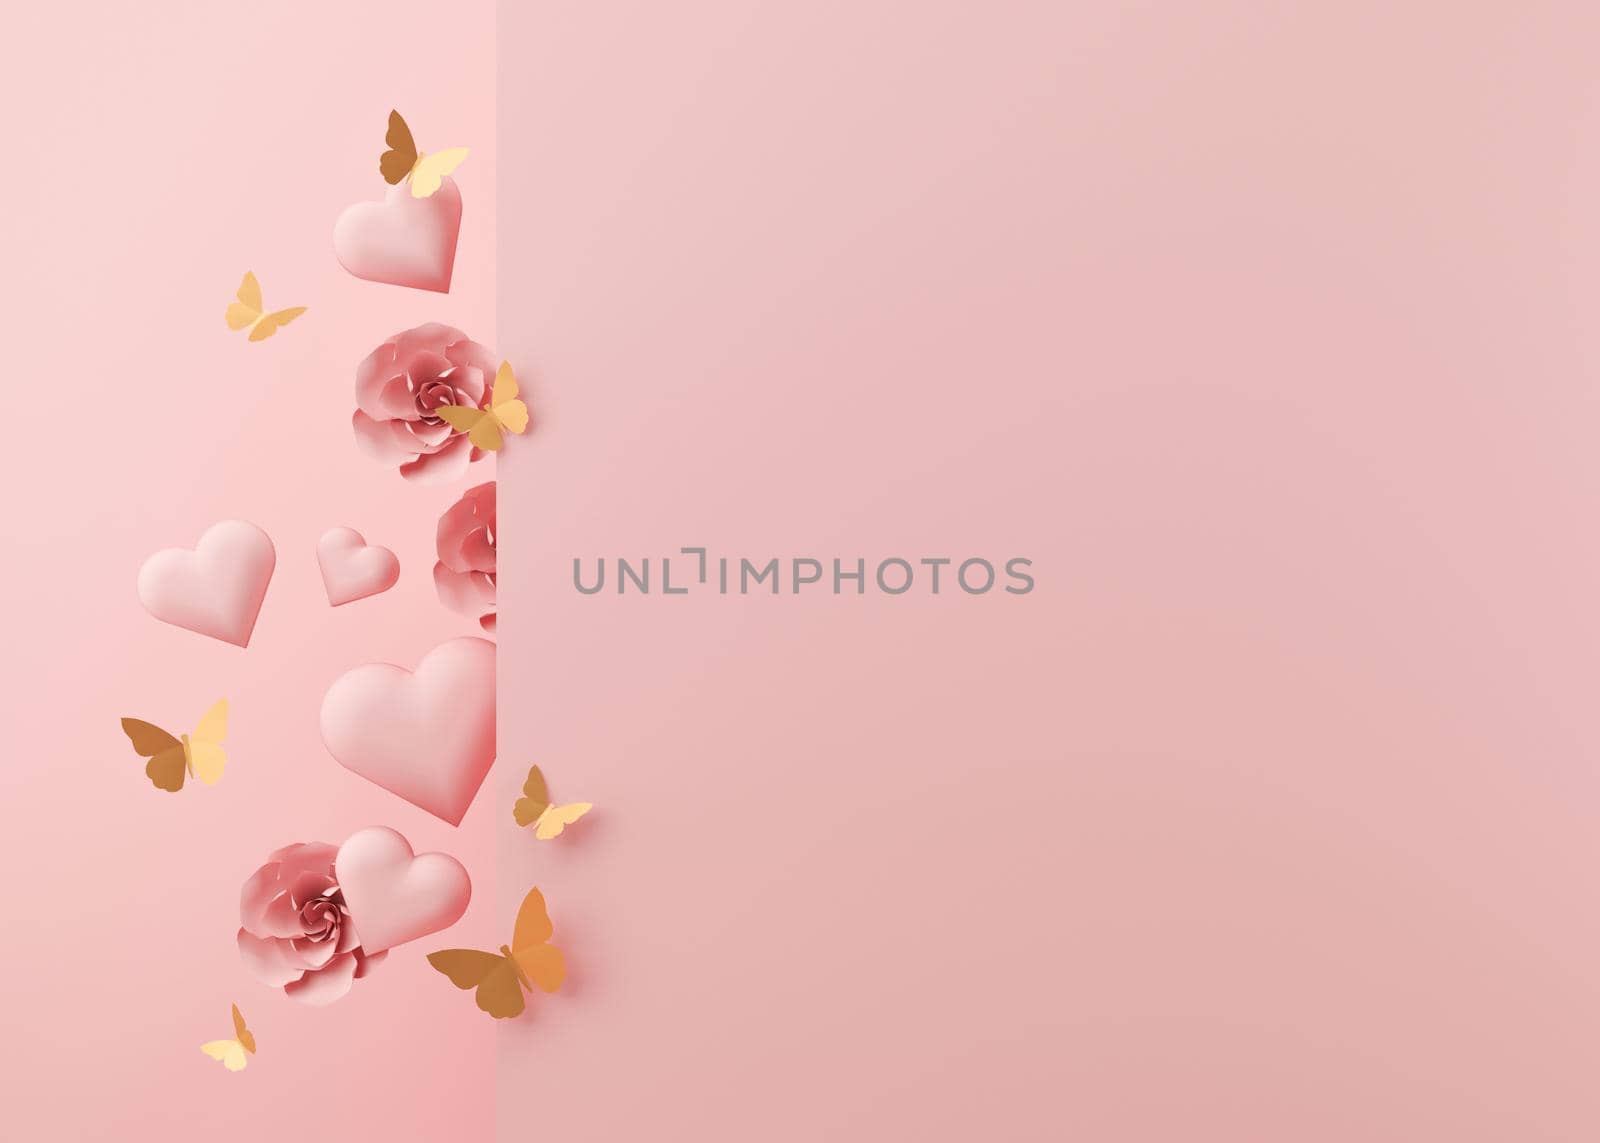 Pink hearts, flowers and golden butterflies. Women's Day, Mother's Day, Wedding, Anniversary background with free space for text, copy space. Postcard, greeting card design, template. 3D illustration